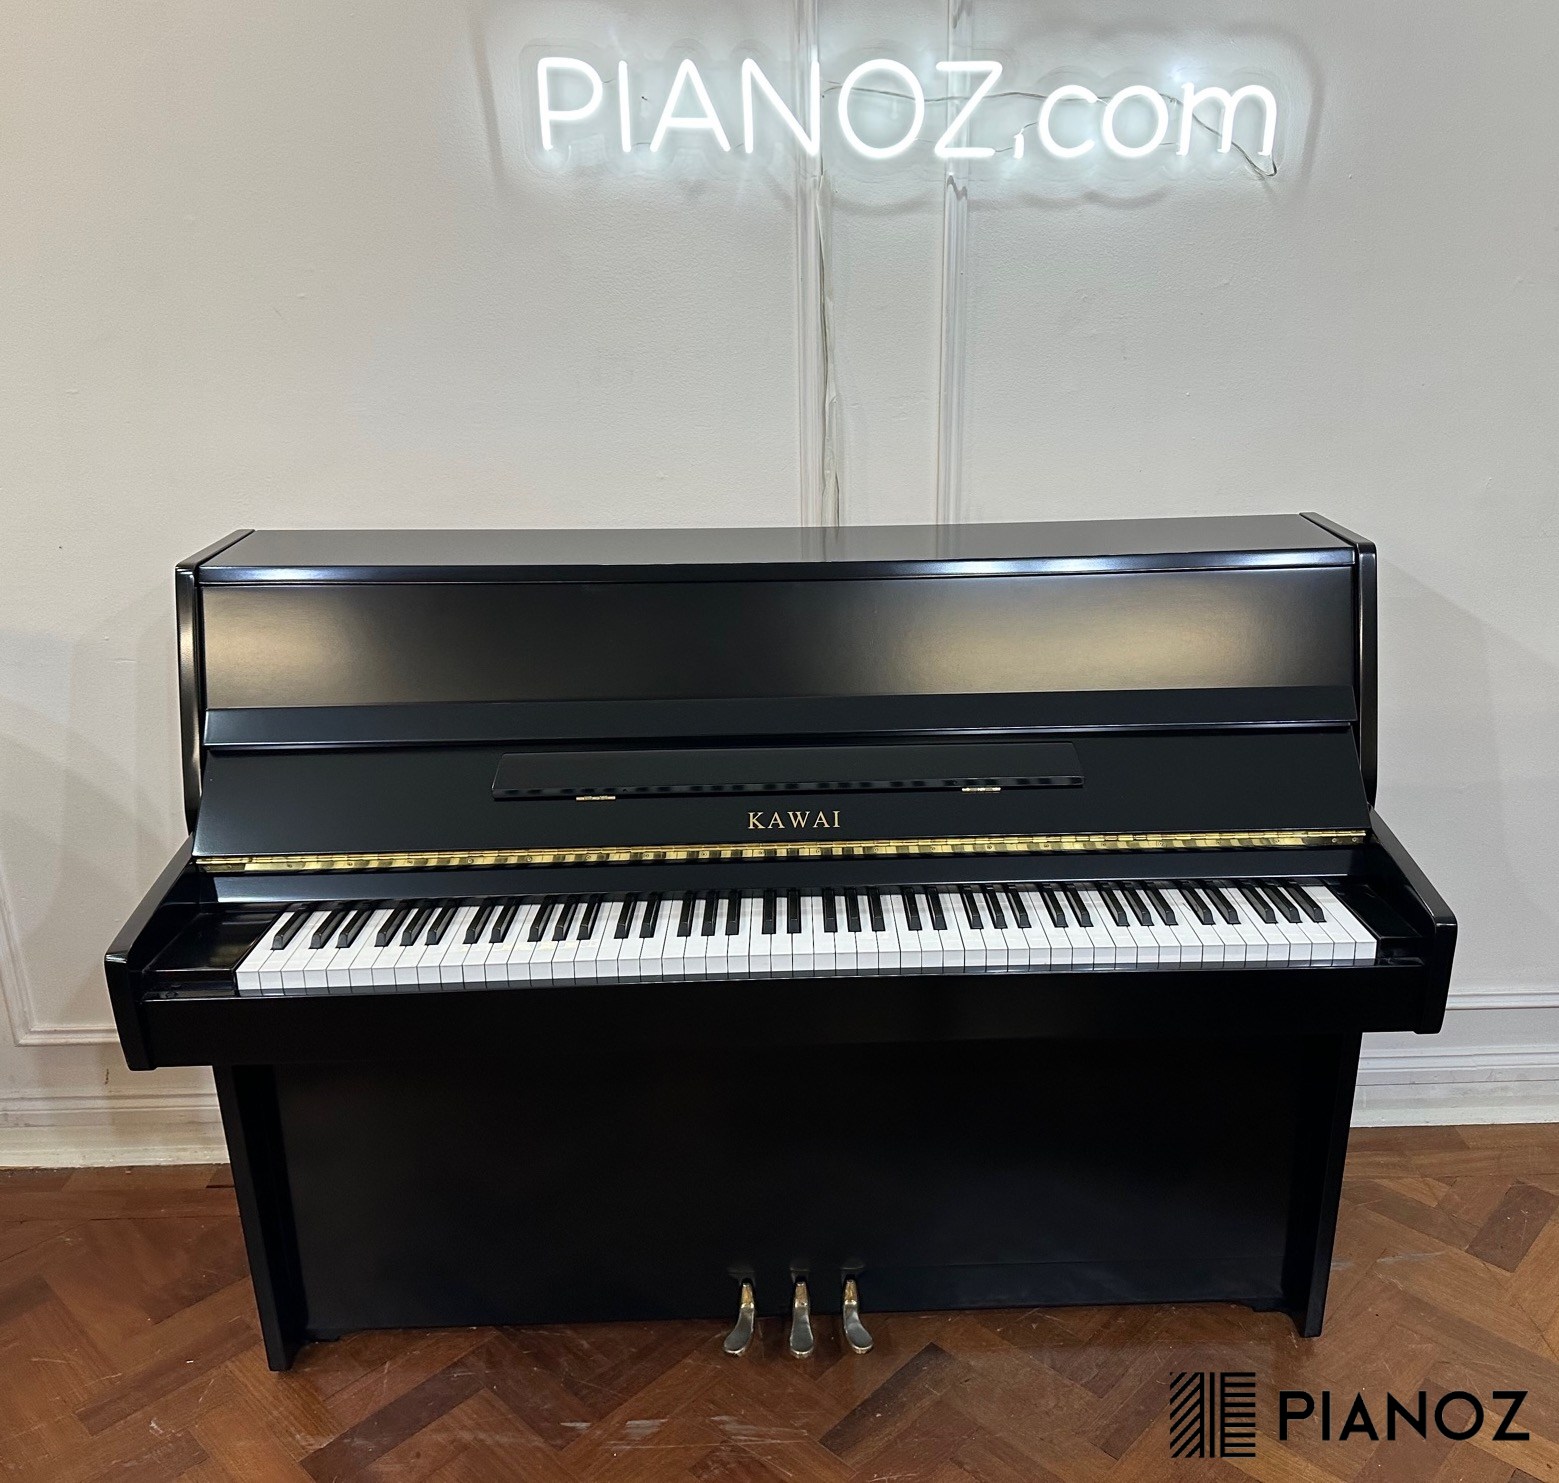 Kawai CE7 Japanese Upright Piano piano for sale in UK